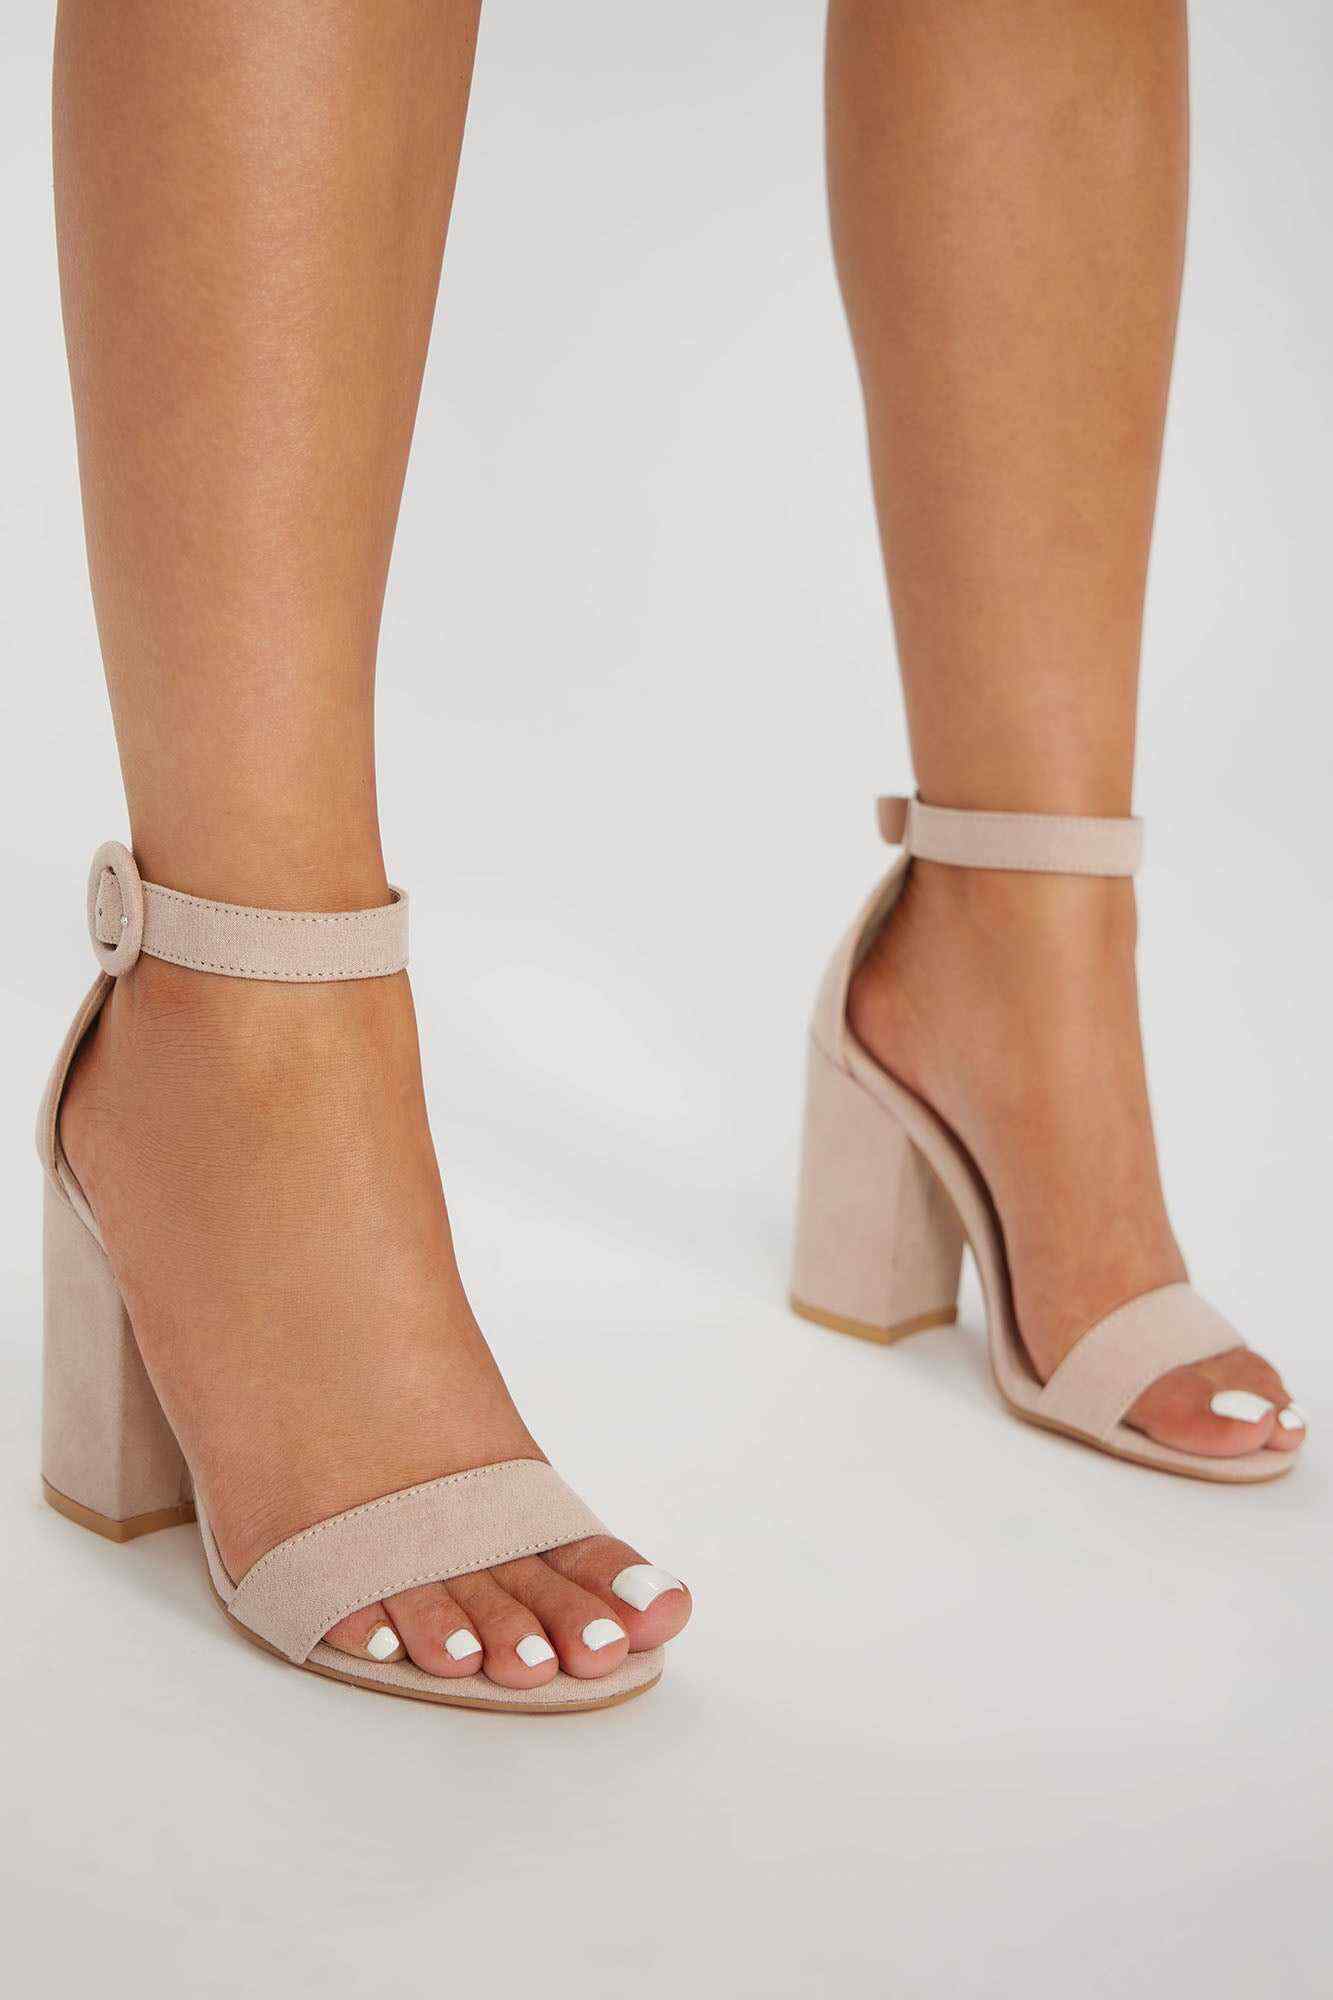 Staying Awhile Heeled Sandals   Beige